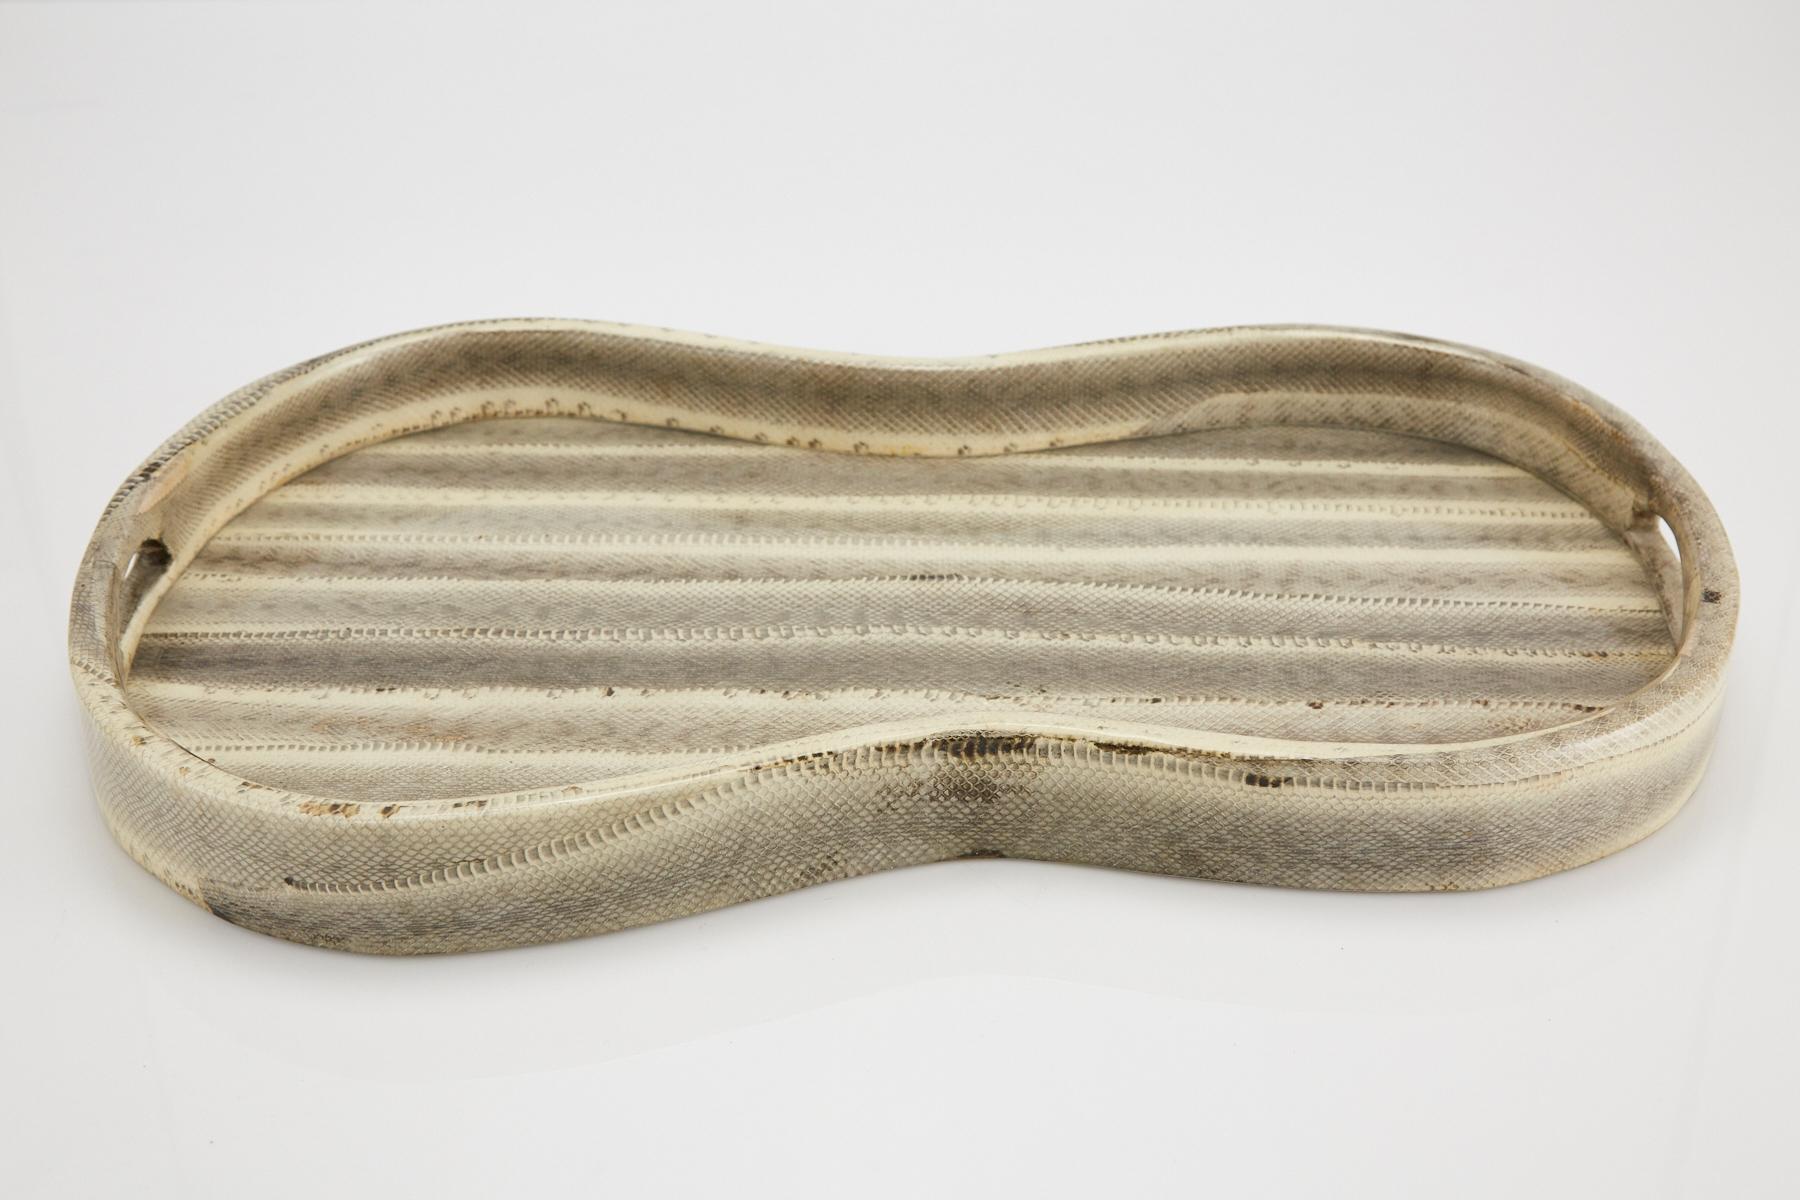 Large peanut-shaped serving or dressing tray executed in snakeskin over wood body. Clear coat finish protects snakeskin from wear. Underside is painted wood. Perfect for your dressing table or breakfast in bed.